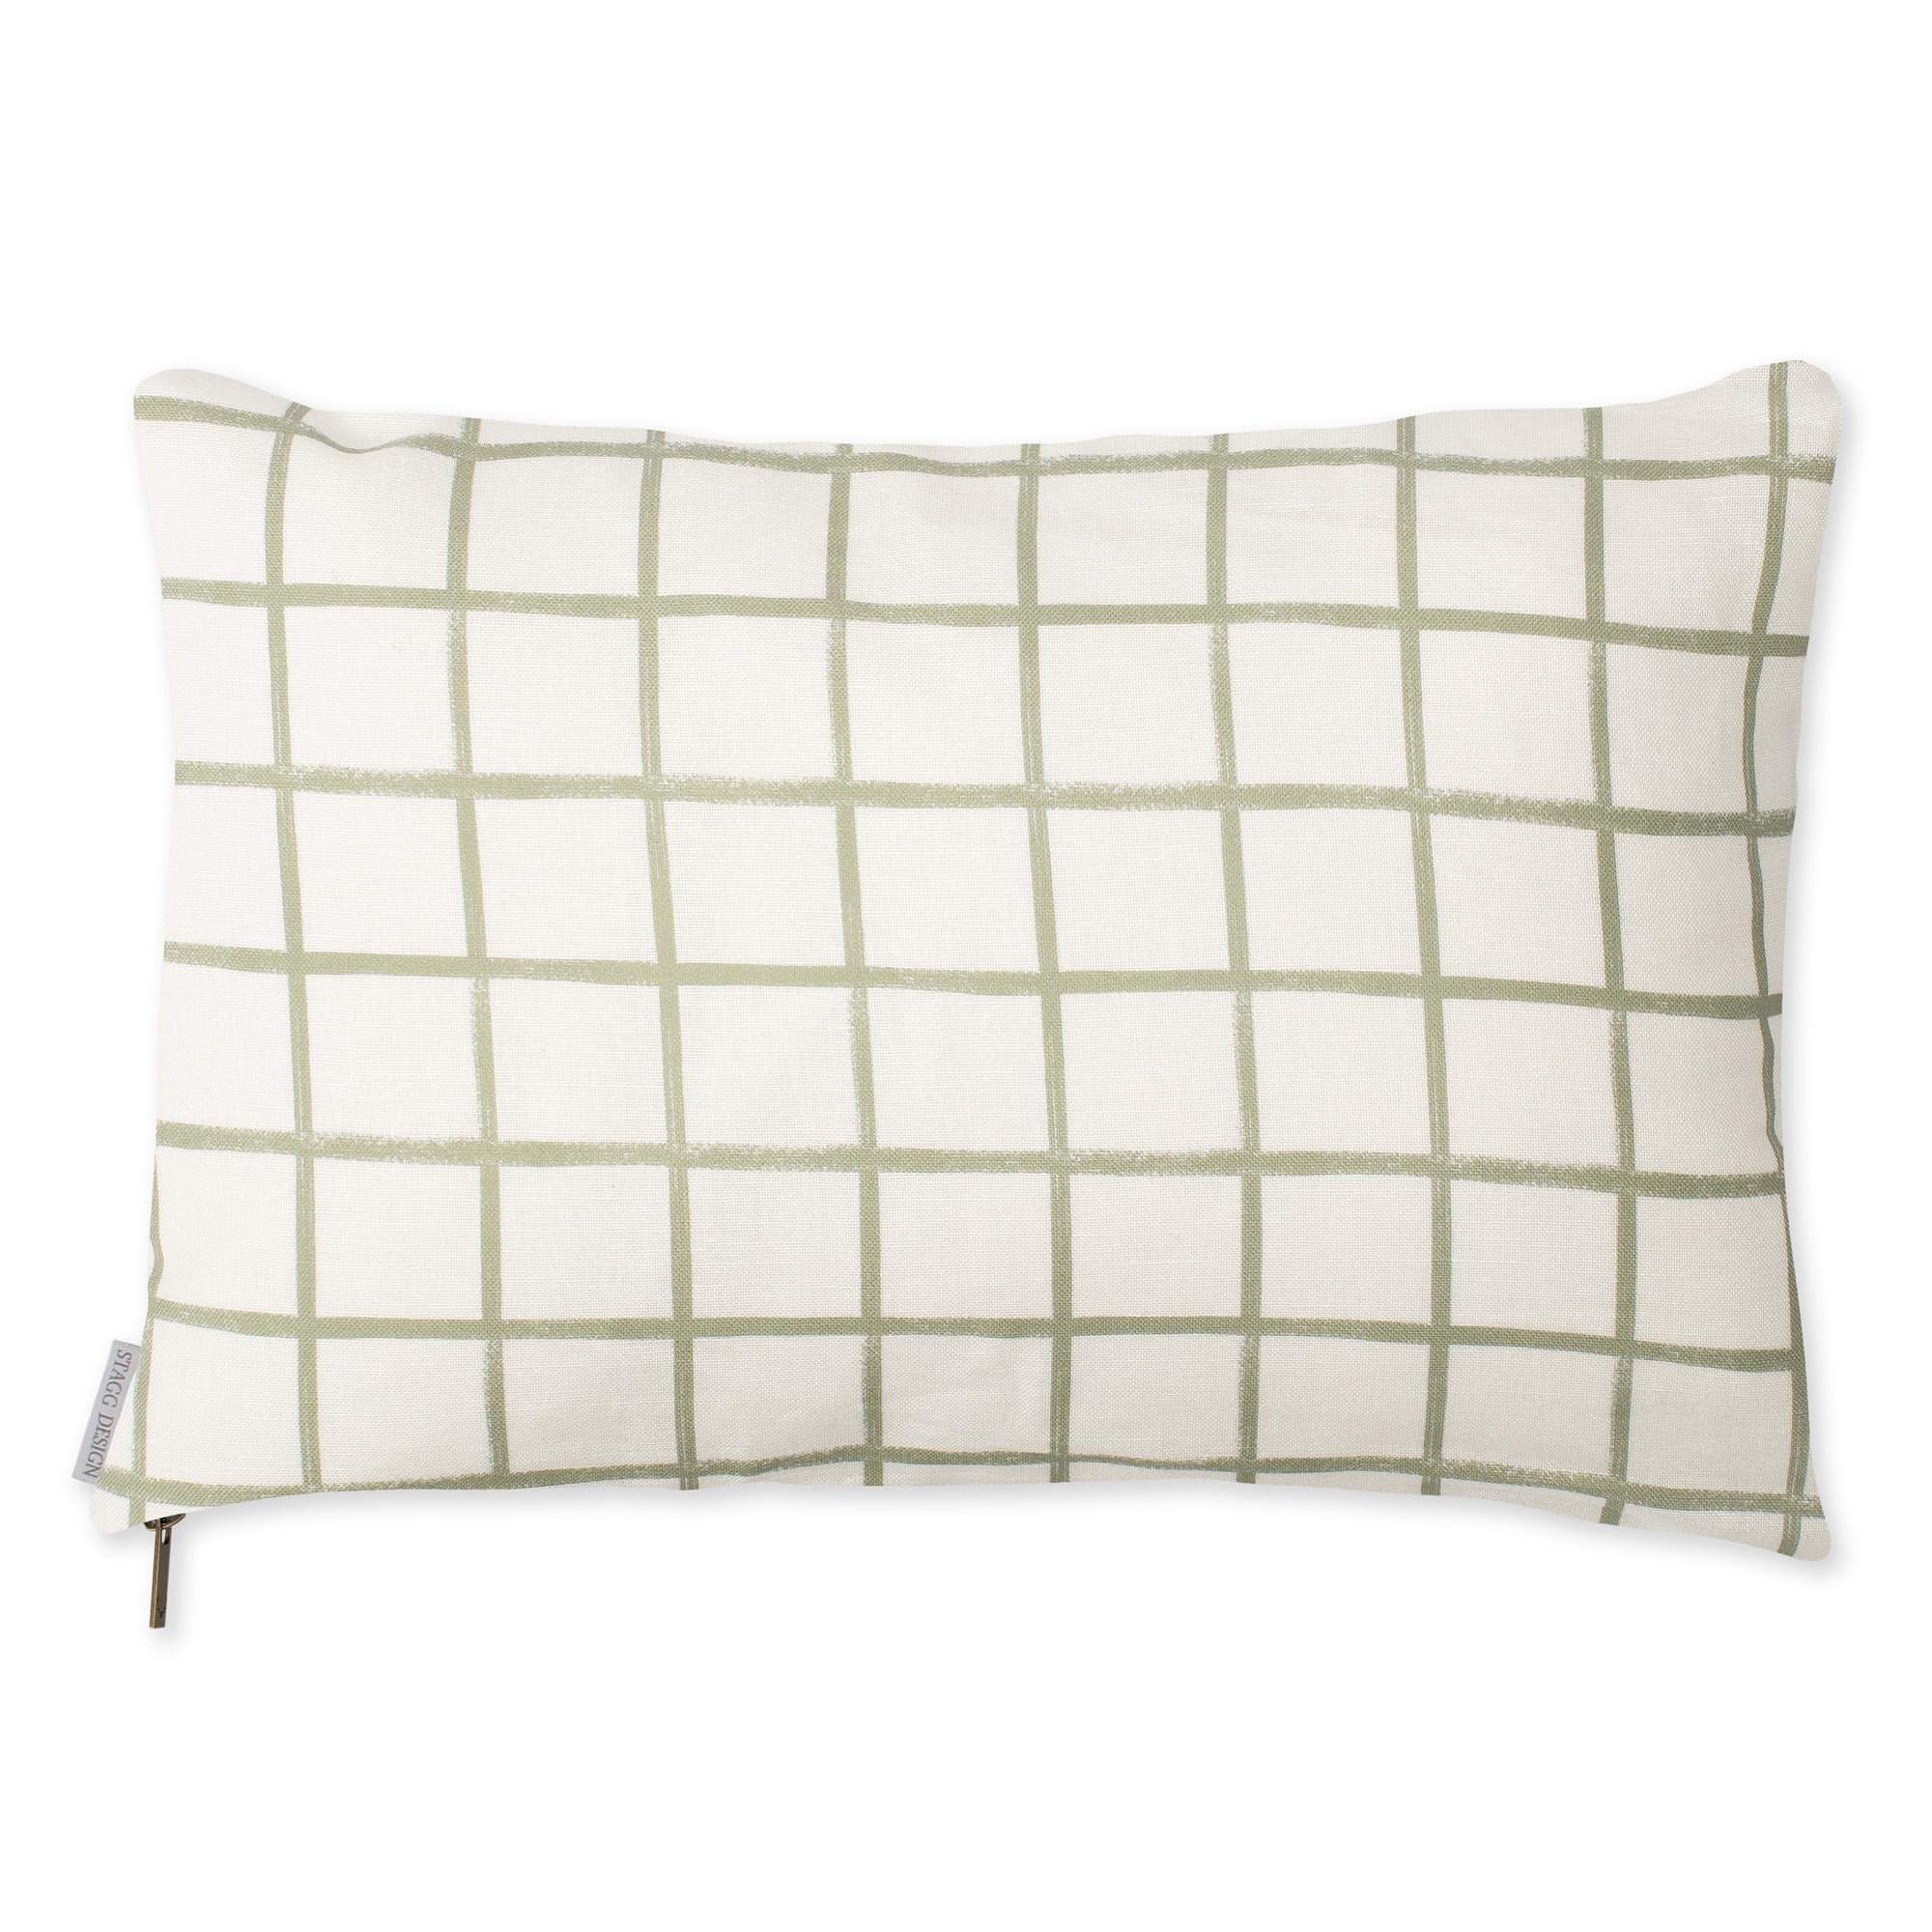 Chase Plaid Pillow - Moss